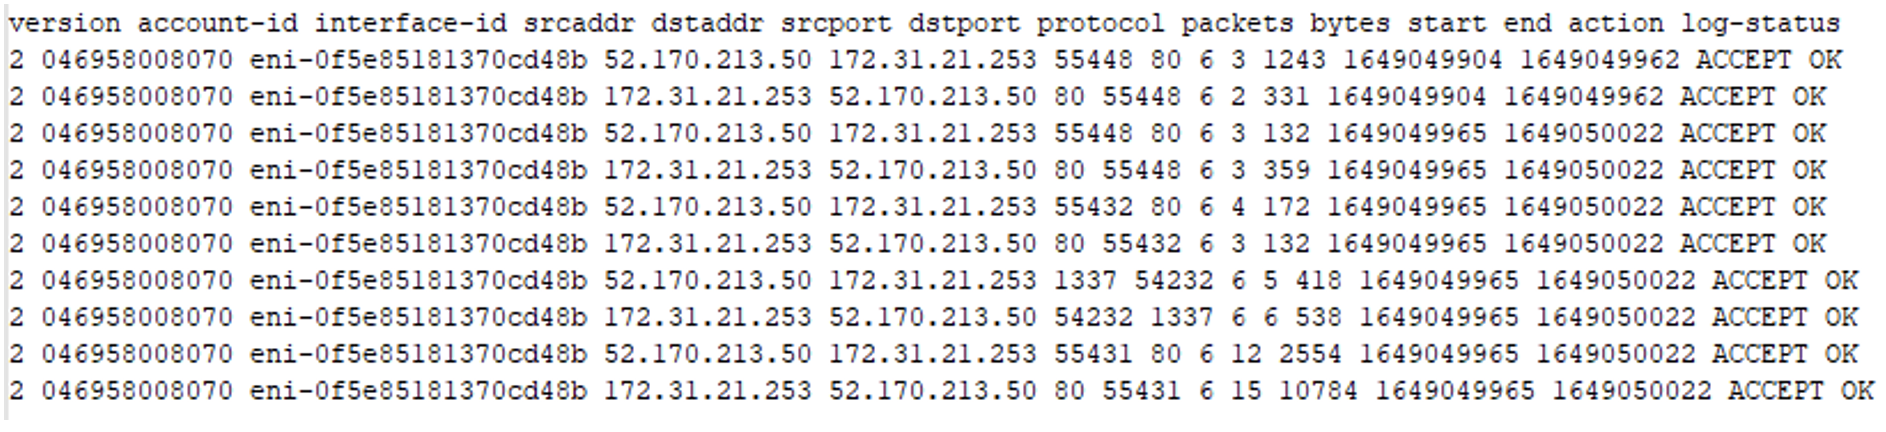 AWS VPC flow logs noting that the simulated victim server made a web request outbound over a malicious port 1337